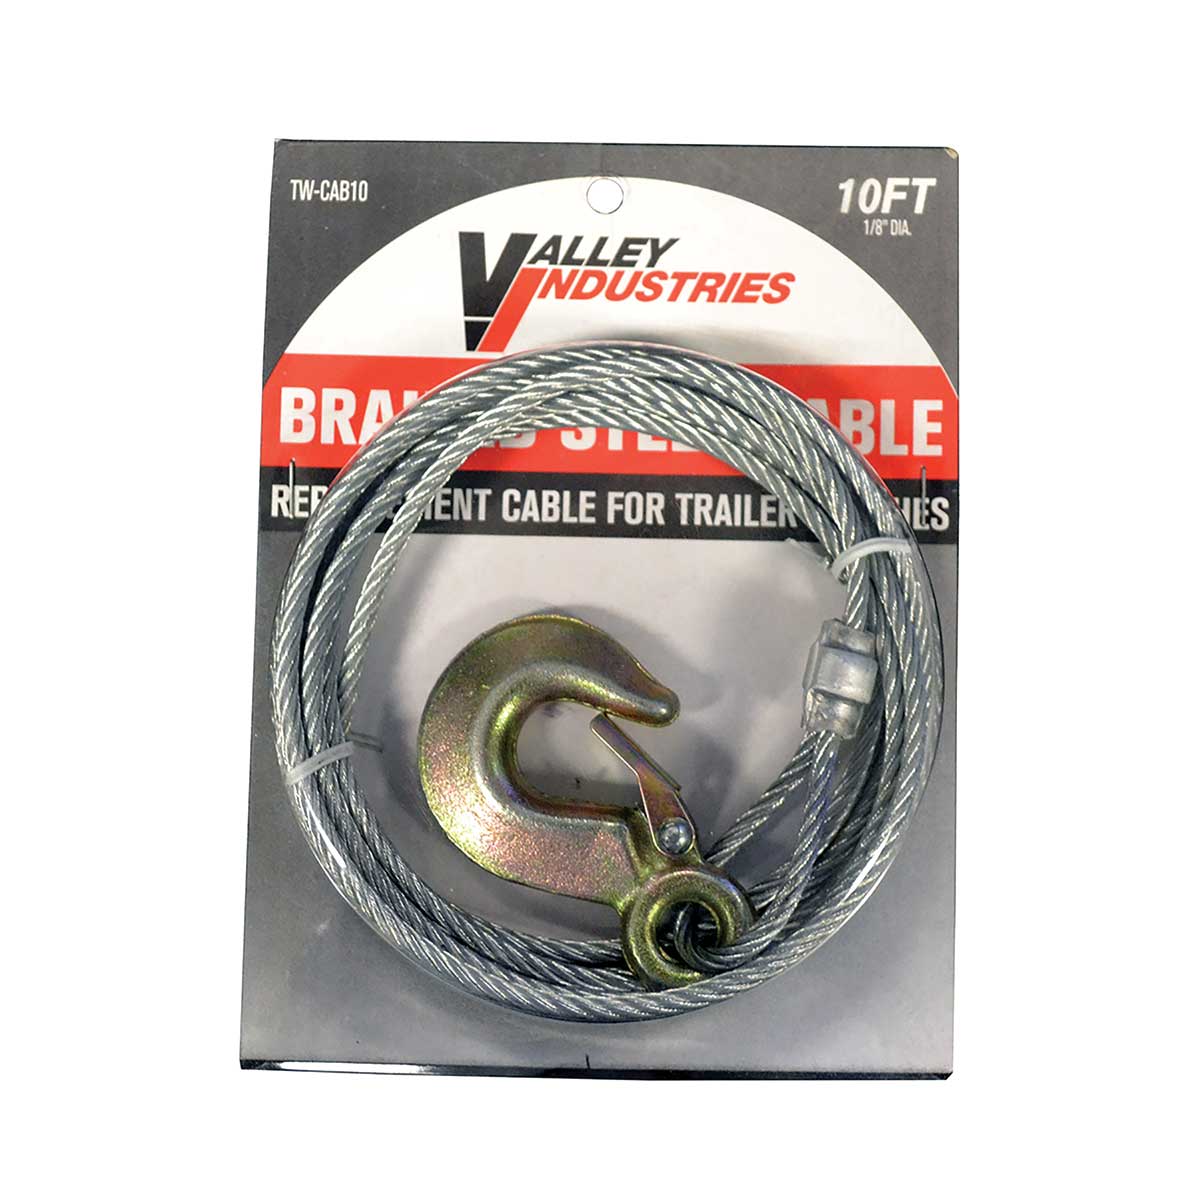 Valley Industries Trailer Winch Replacement Cable - 10' Length